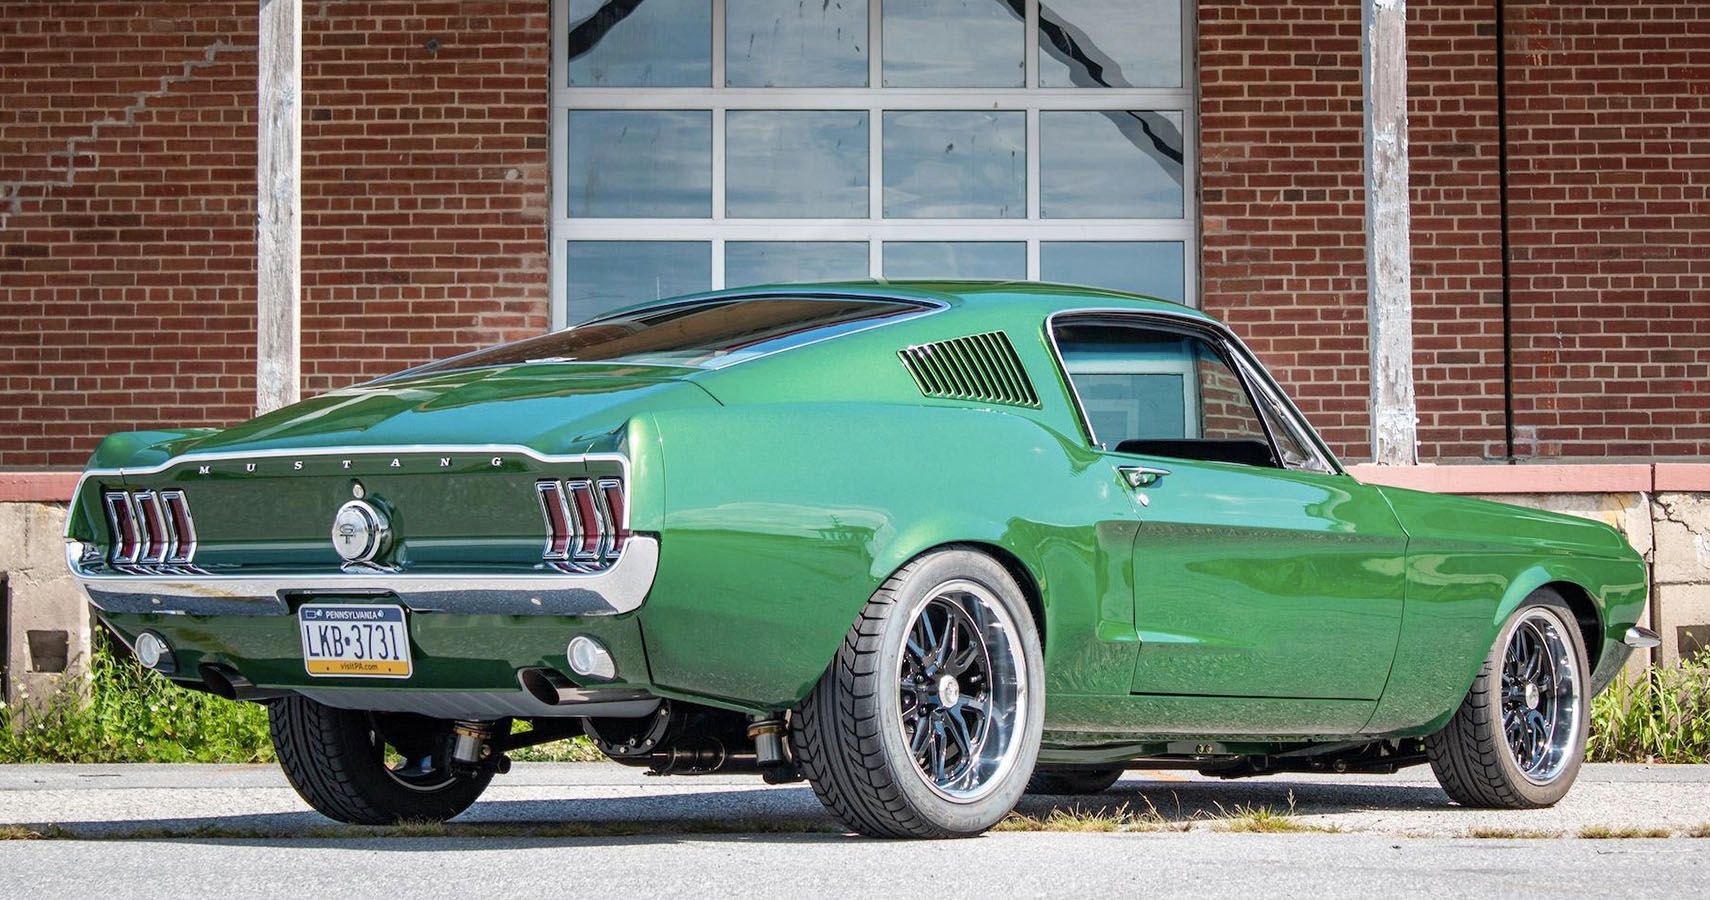 Boyce Customs' Coyote-Swapped Ford Mustang Restomod For Sale